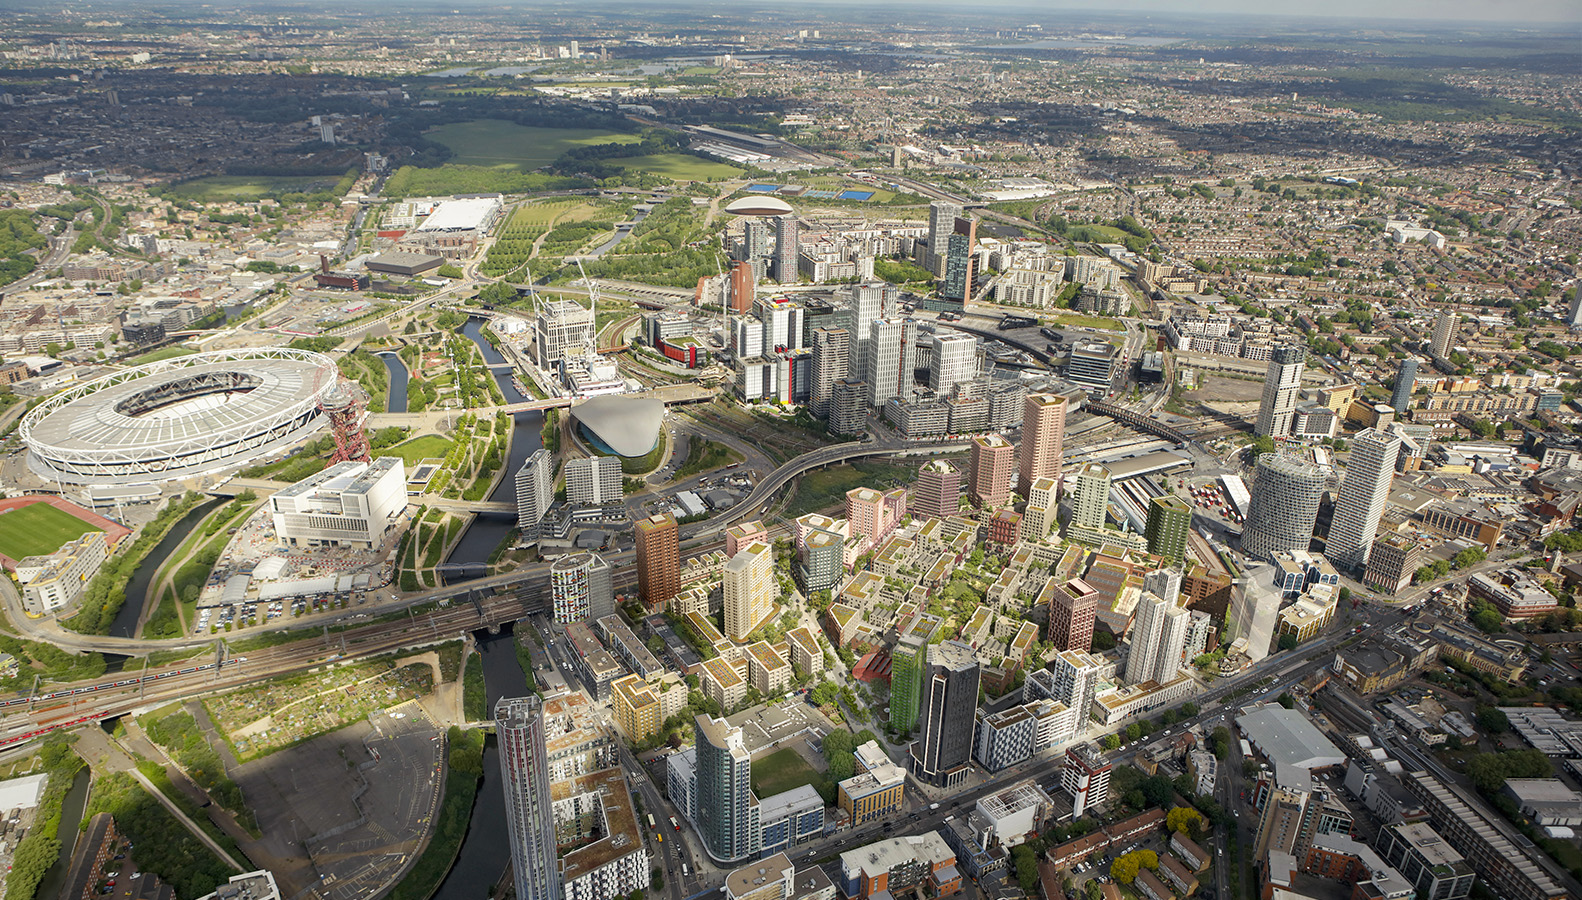 Carpenters Estate £1bn regeneration plans approved at committee 